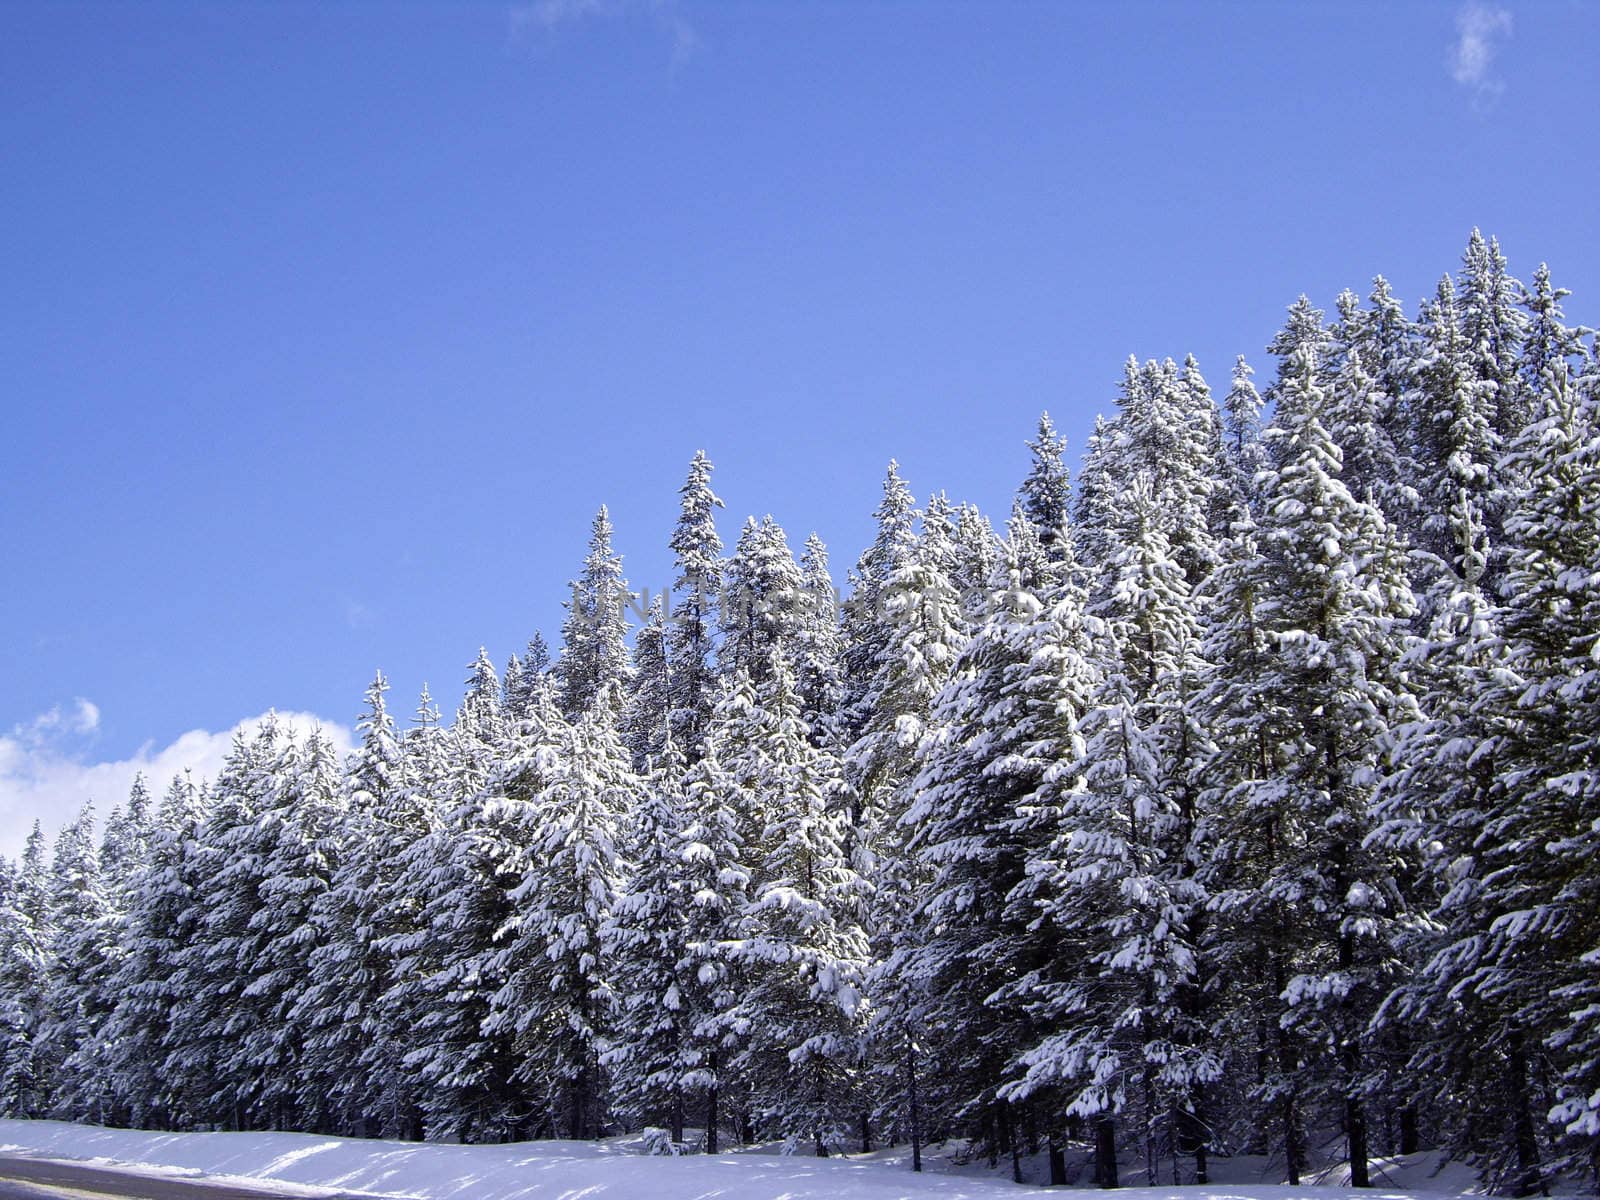 Winter forest in May at Yellowstone National Park